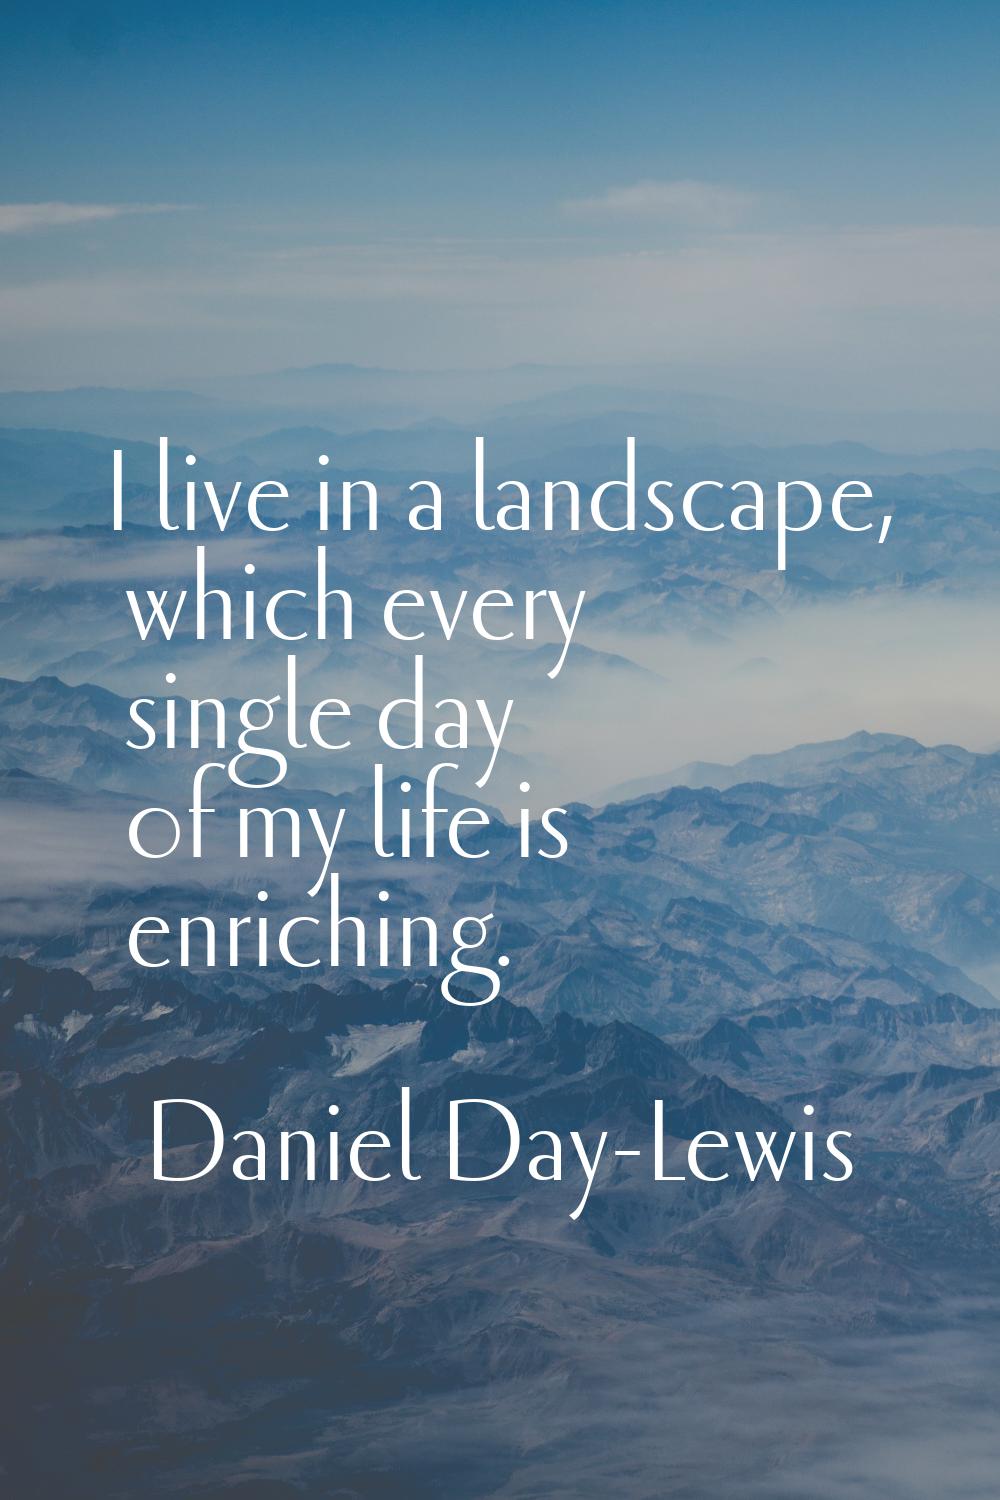 I live in a landscape, which every single day of my life is enriching.